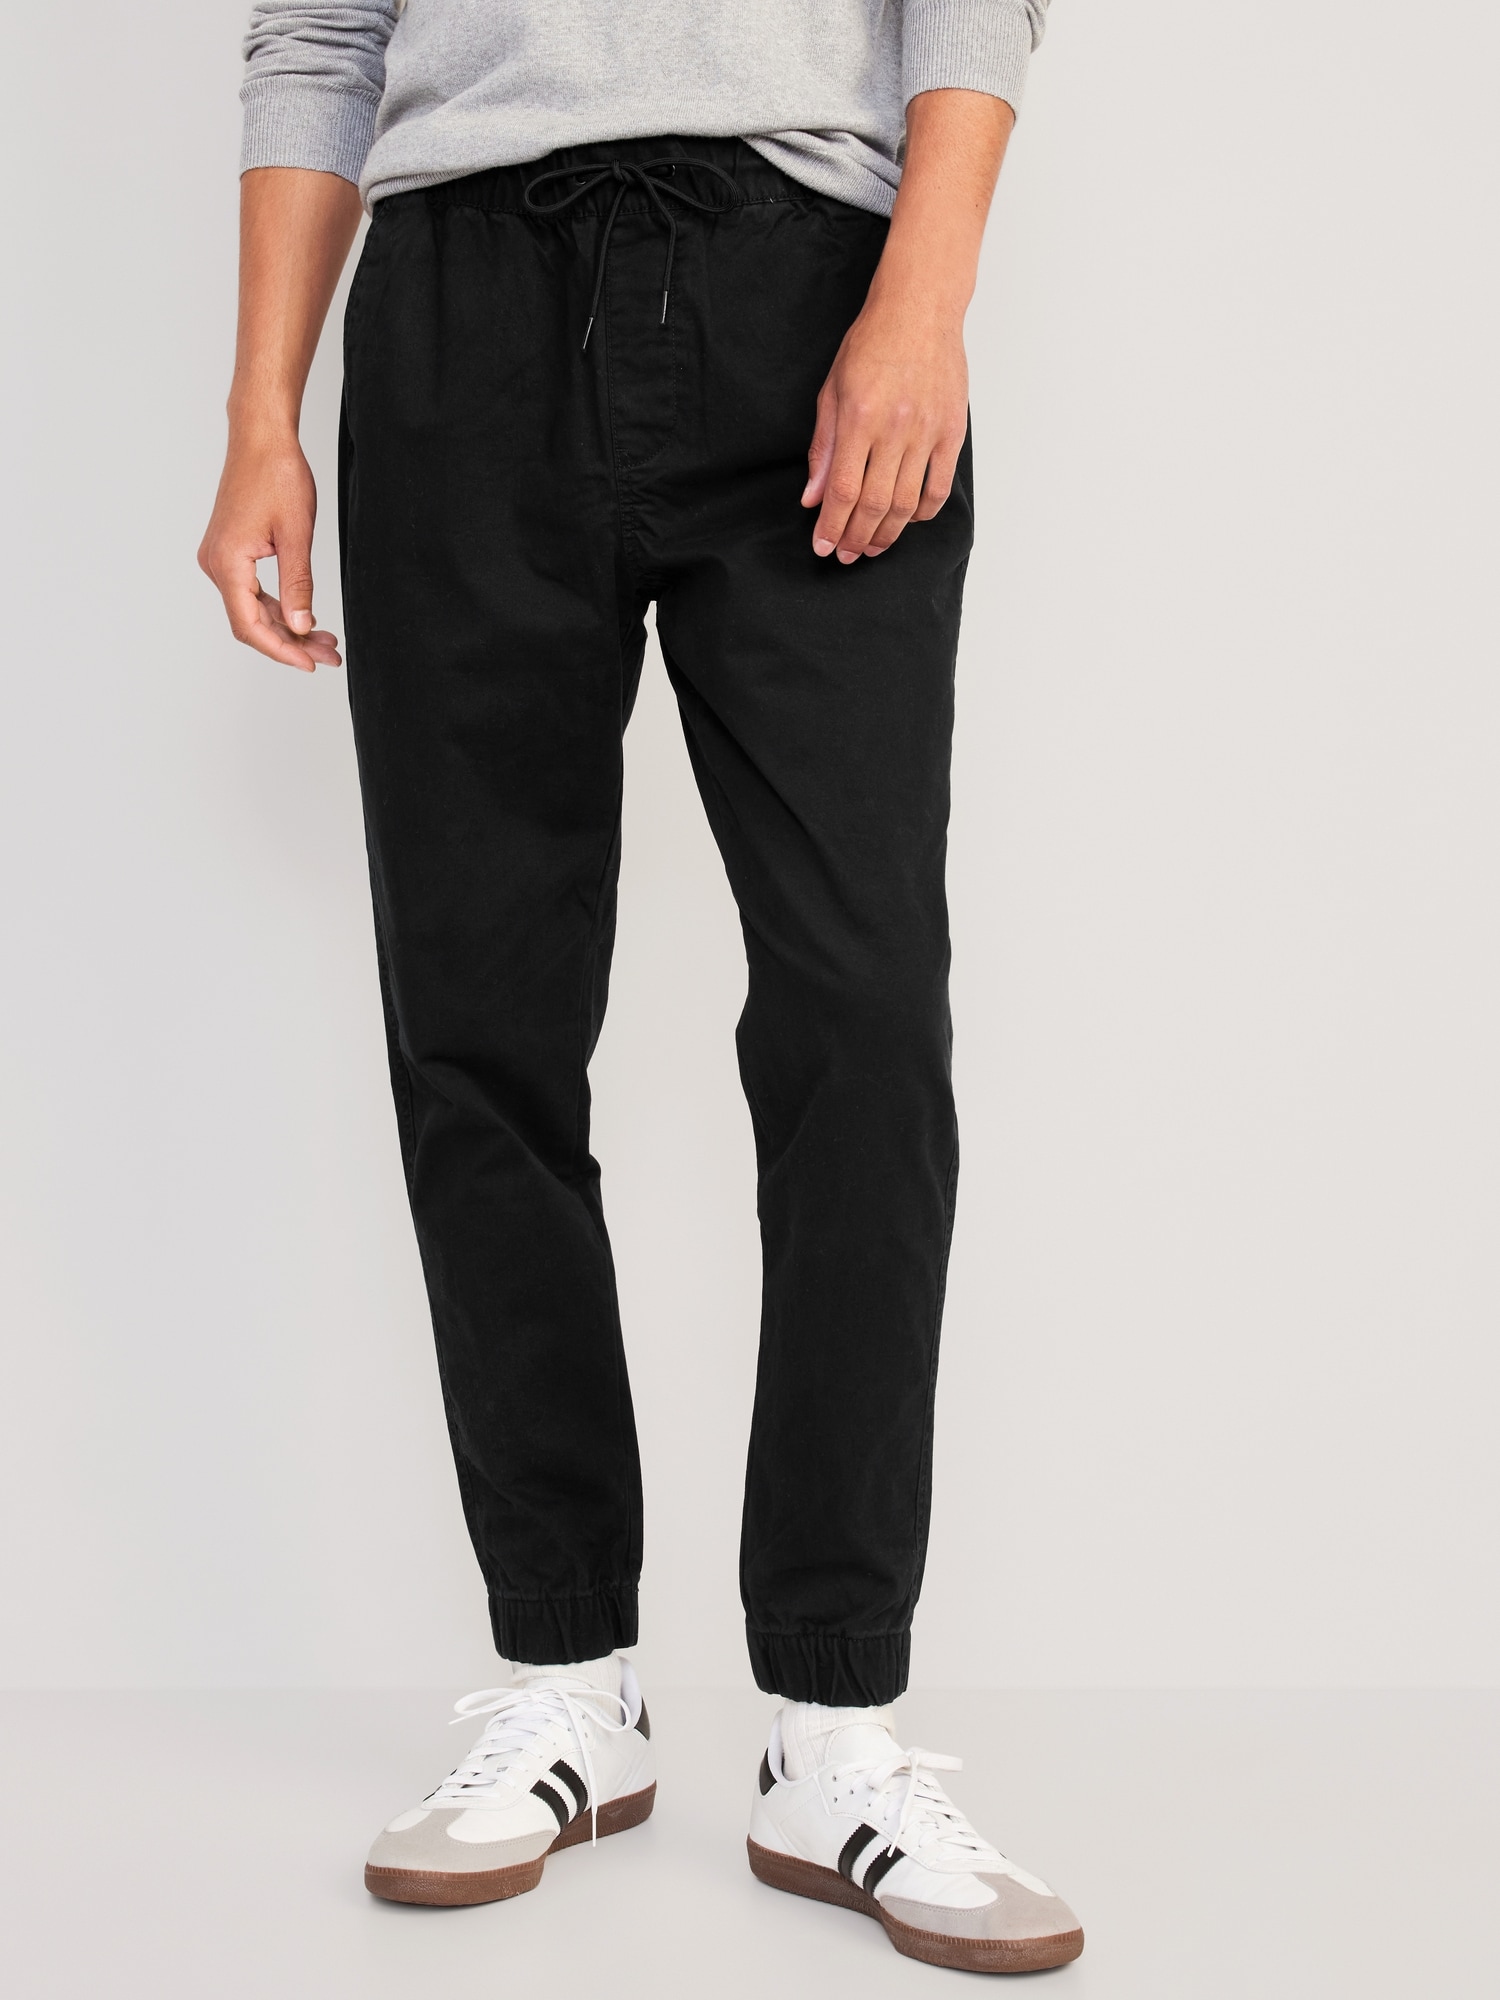 Buy ONE SKY Track Pant for Men, Versatile Joggers, Breathable